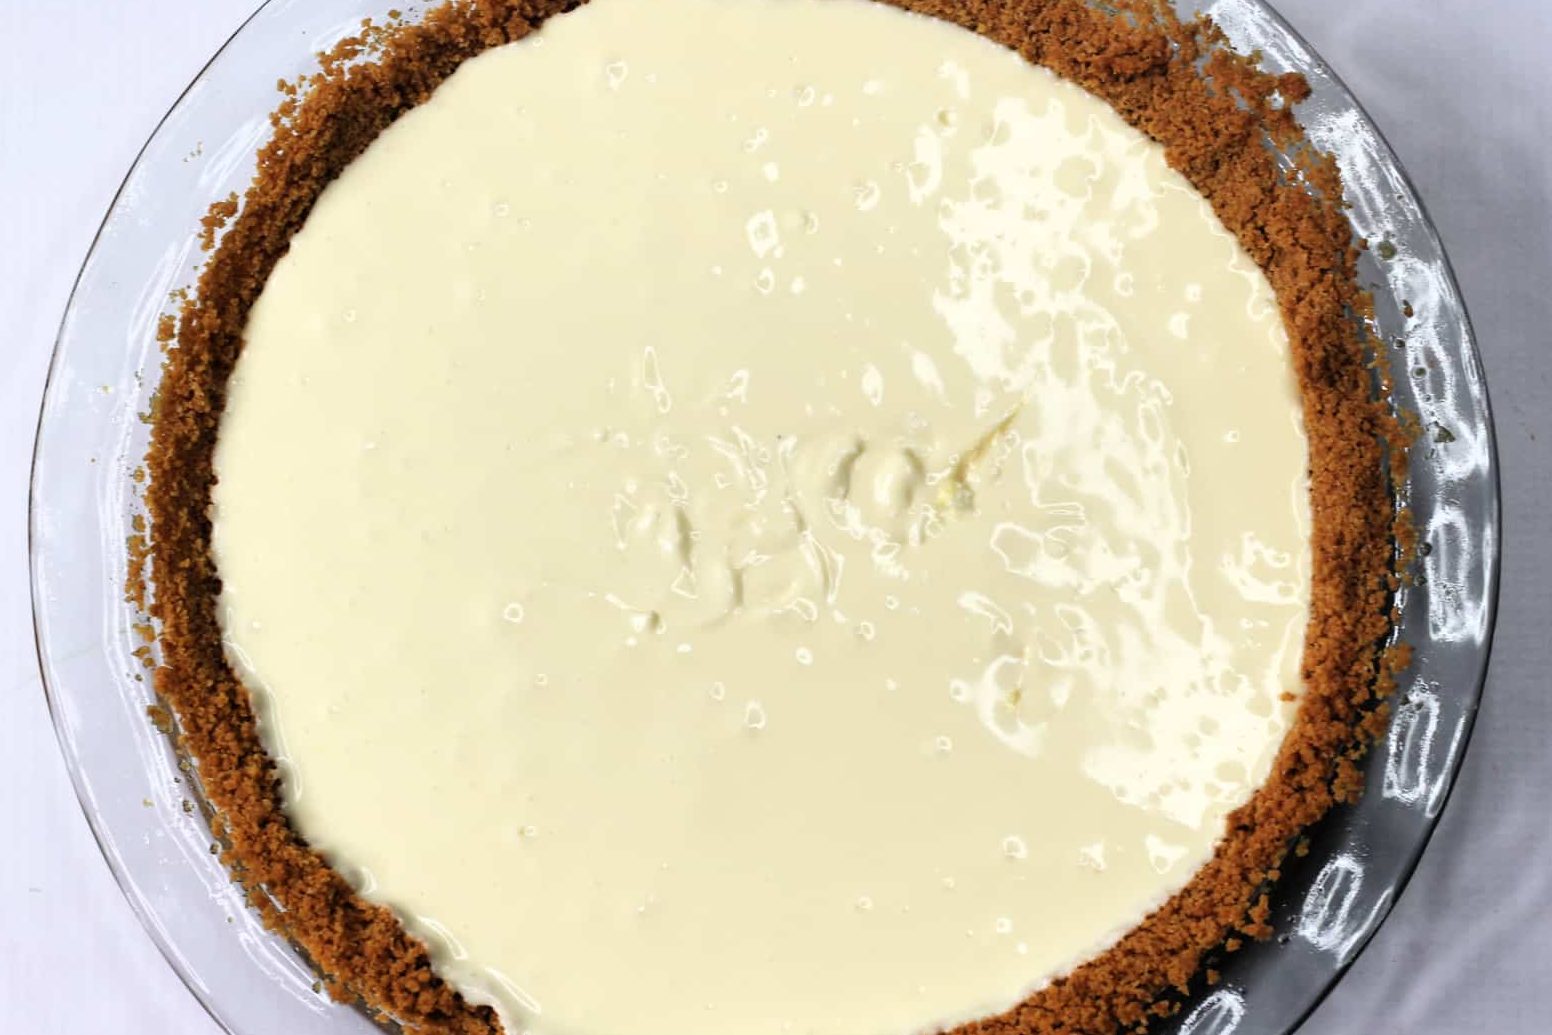 Pour the mixture into the crust and place into the fridge for 4-6 hours or until firm